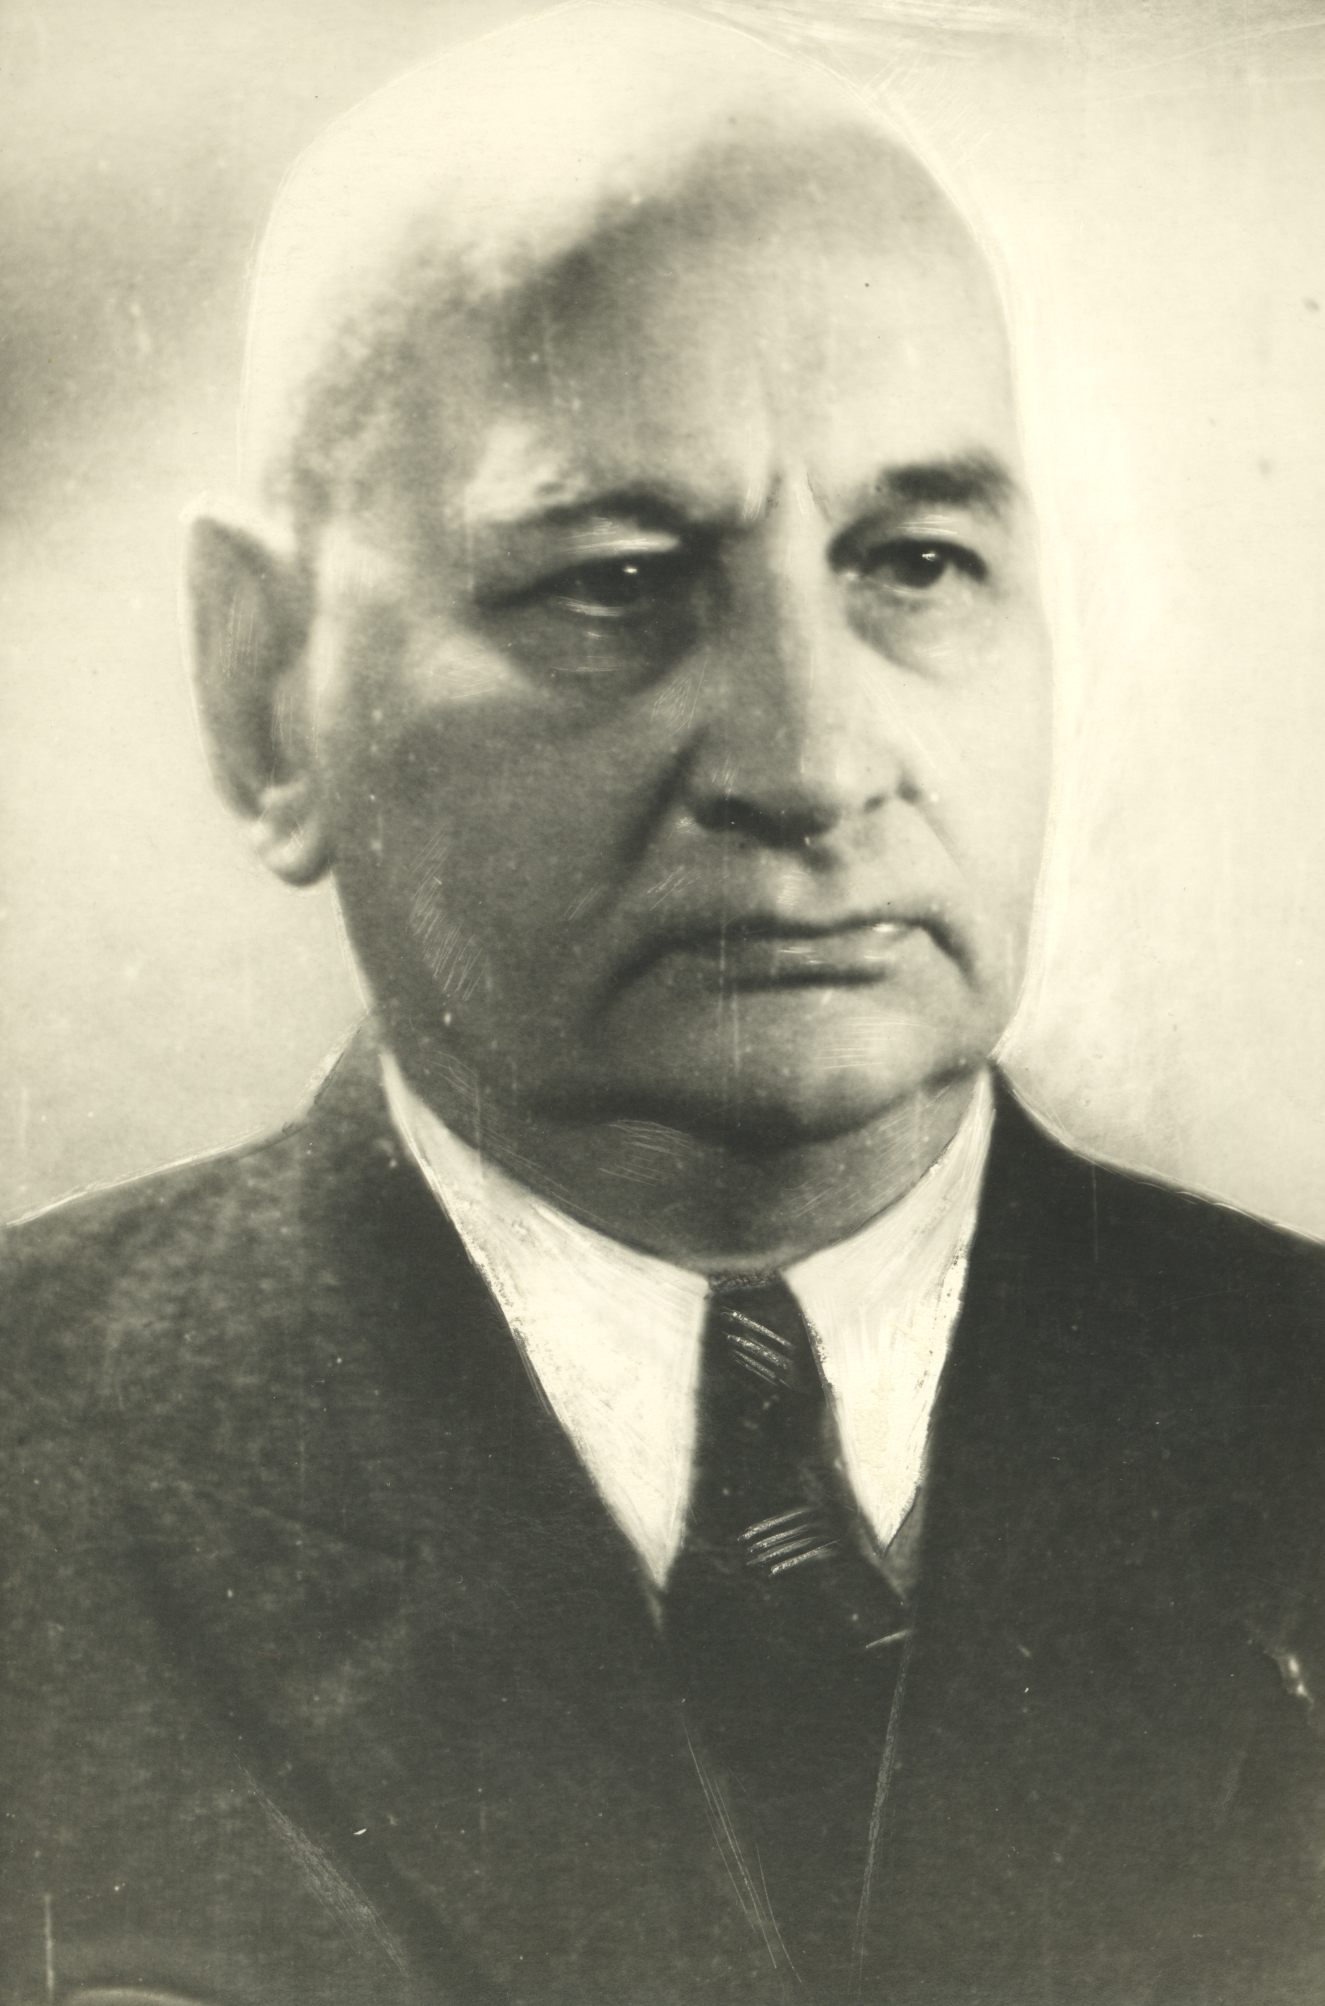 August Alle at the beginning of the 1950s